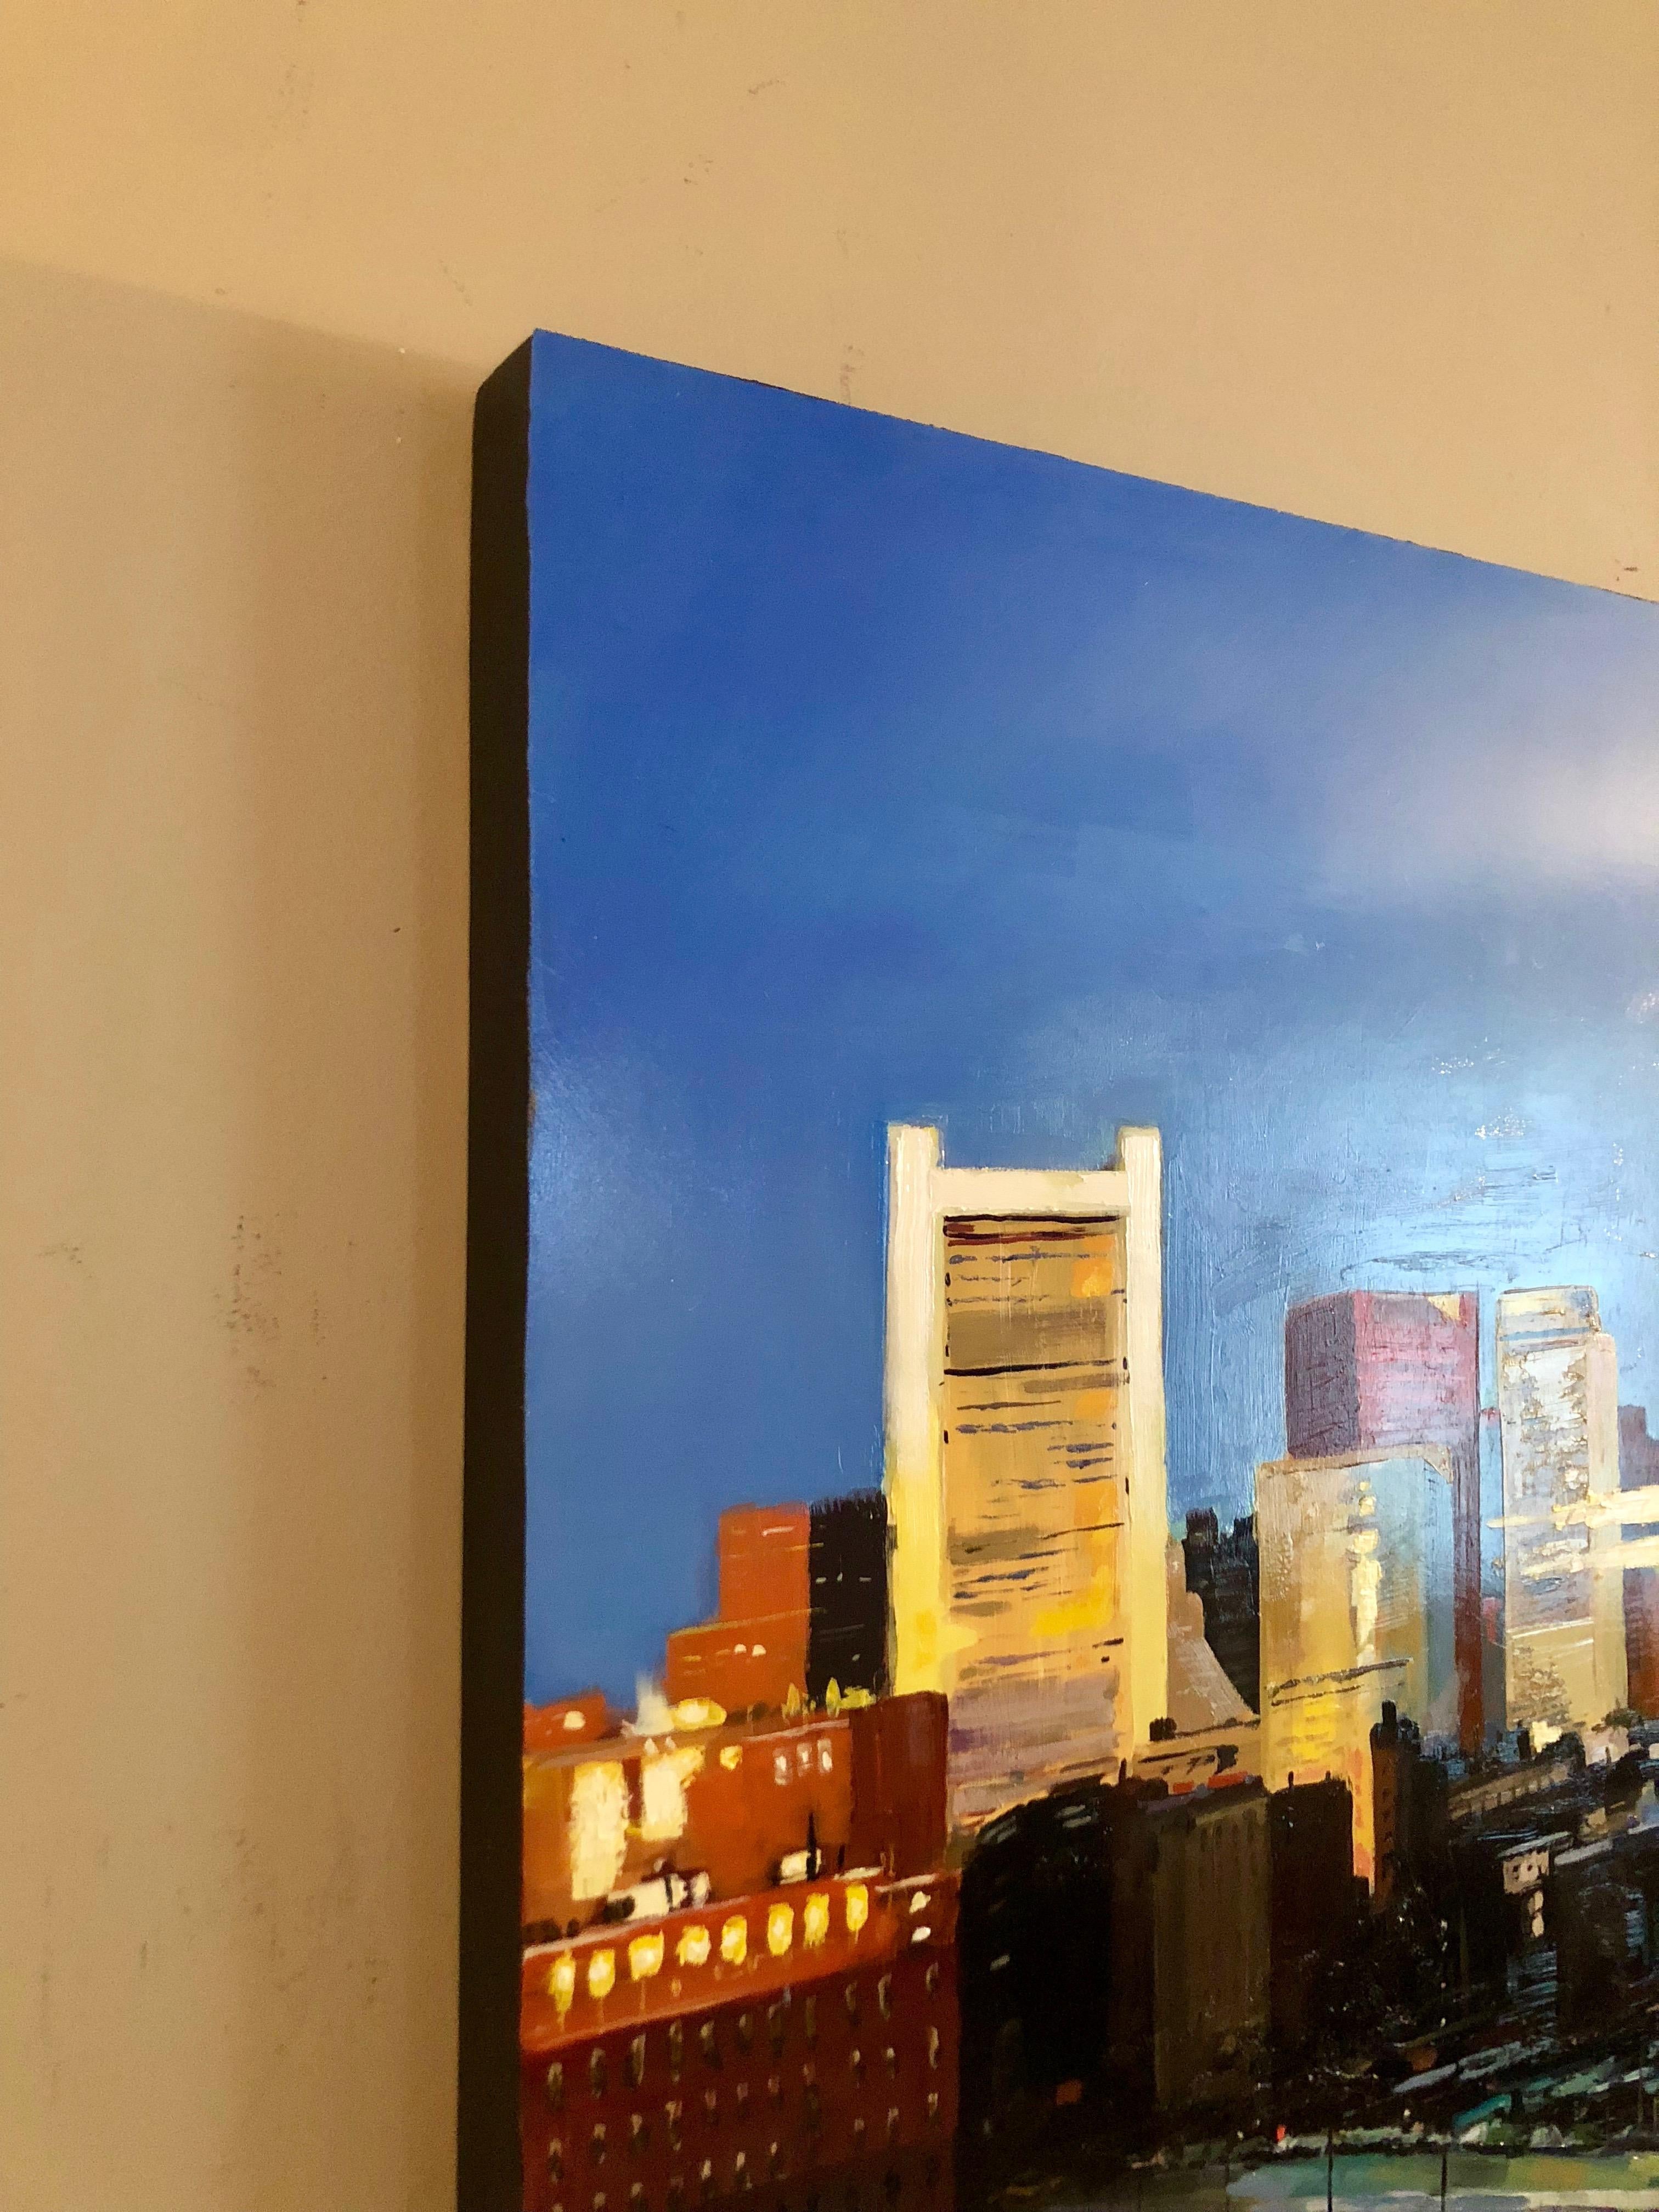 Chris Plunkett’s “Sunrise Over the City” is a 24 x 24 inch oil painting that is part of an ongoing cityscape and urban landscape series. This painting comes fully varnished with a UV protectant archival gloss finish. It hangs easily with a wire on